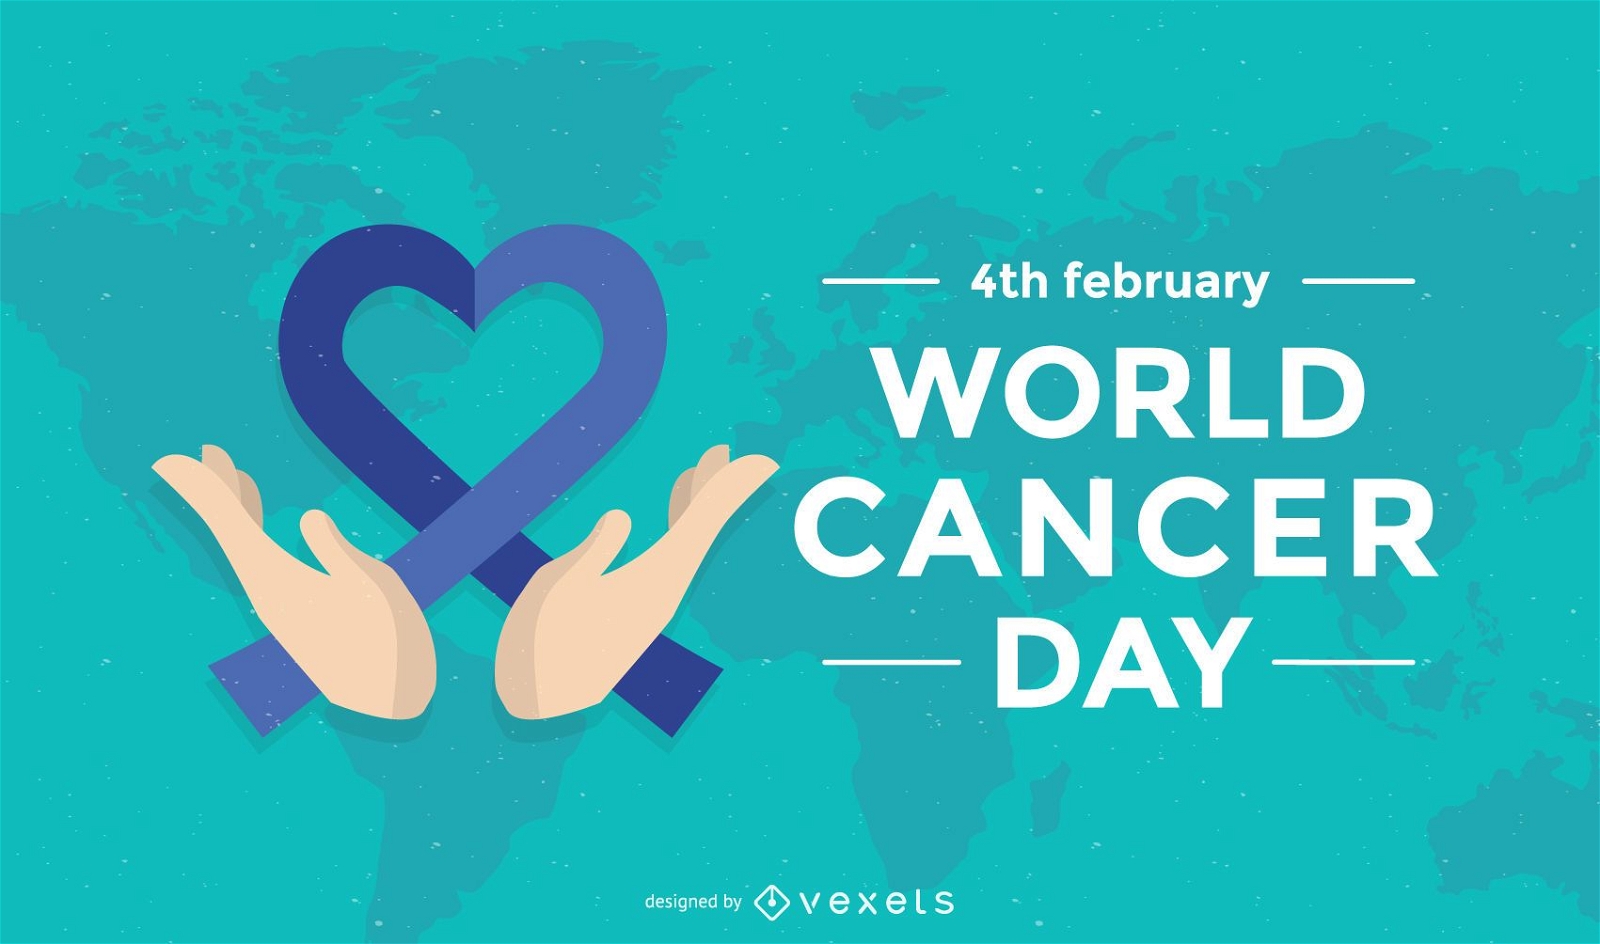 World Cancer Day poster